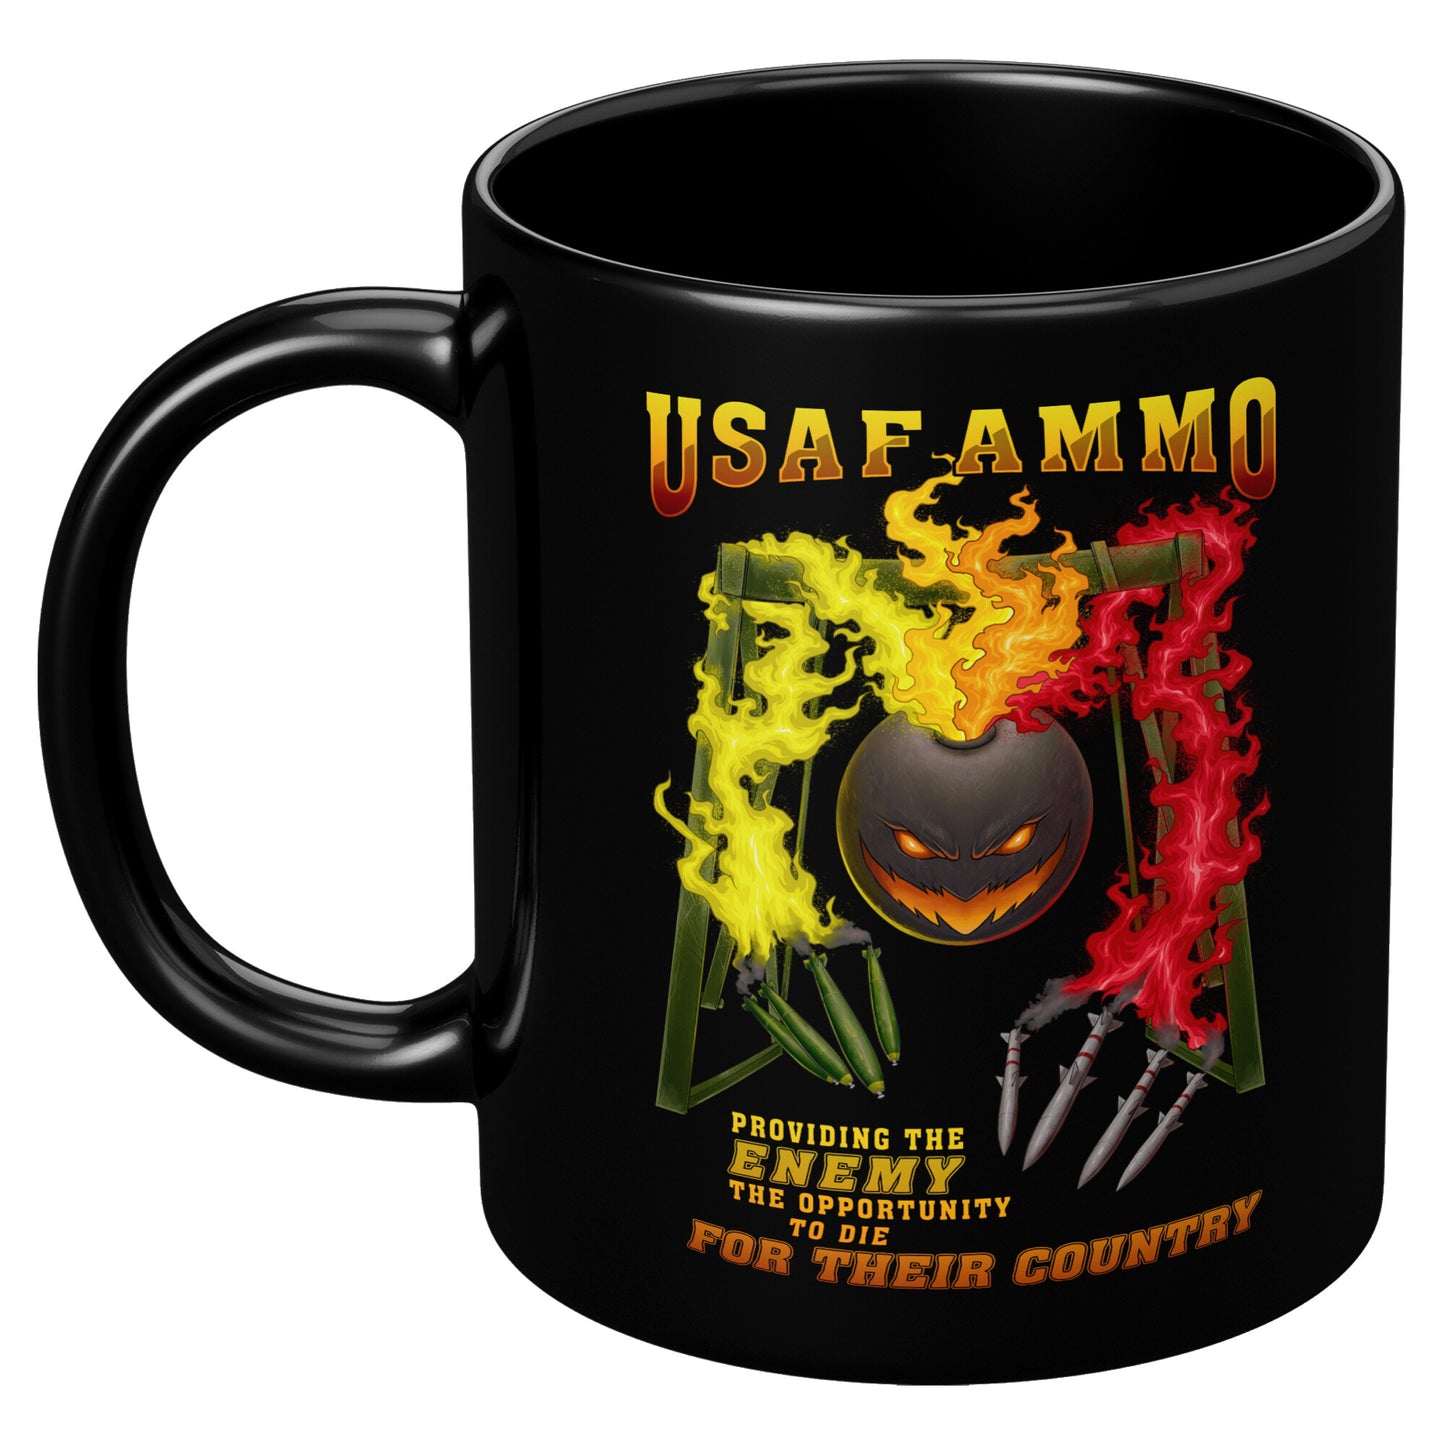 AMMO Flaming Pisspot Fire Arms Gantry Bomb and Missile Fingers black 11oz coffee mug